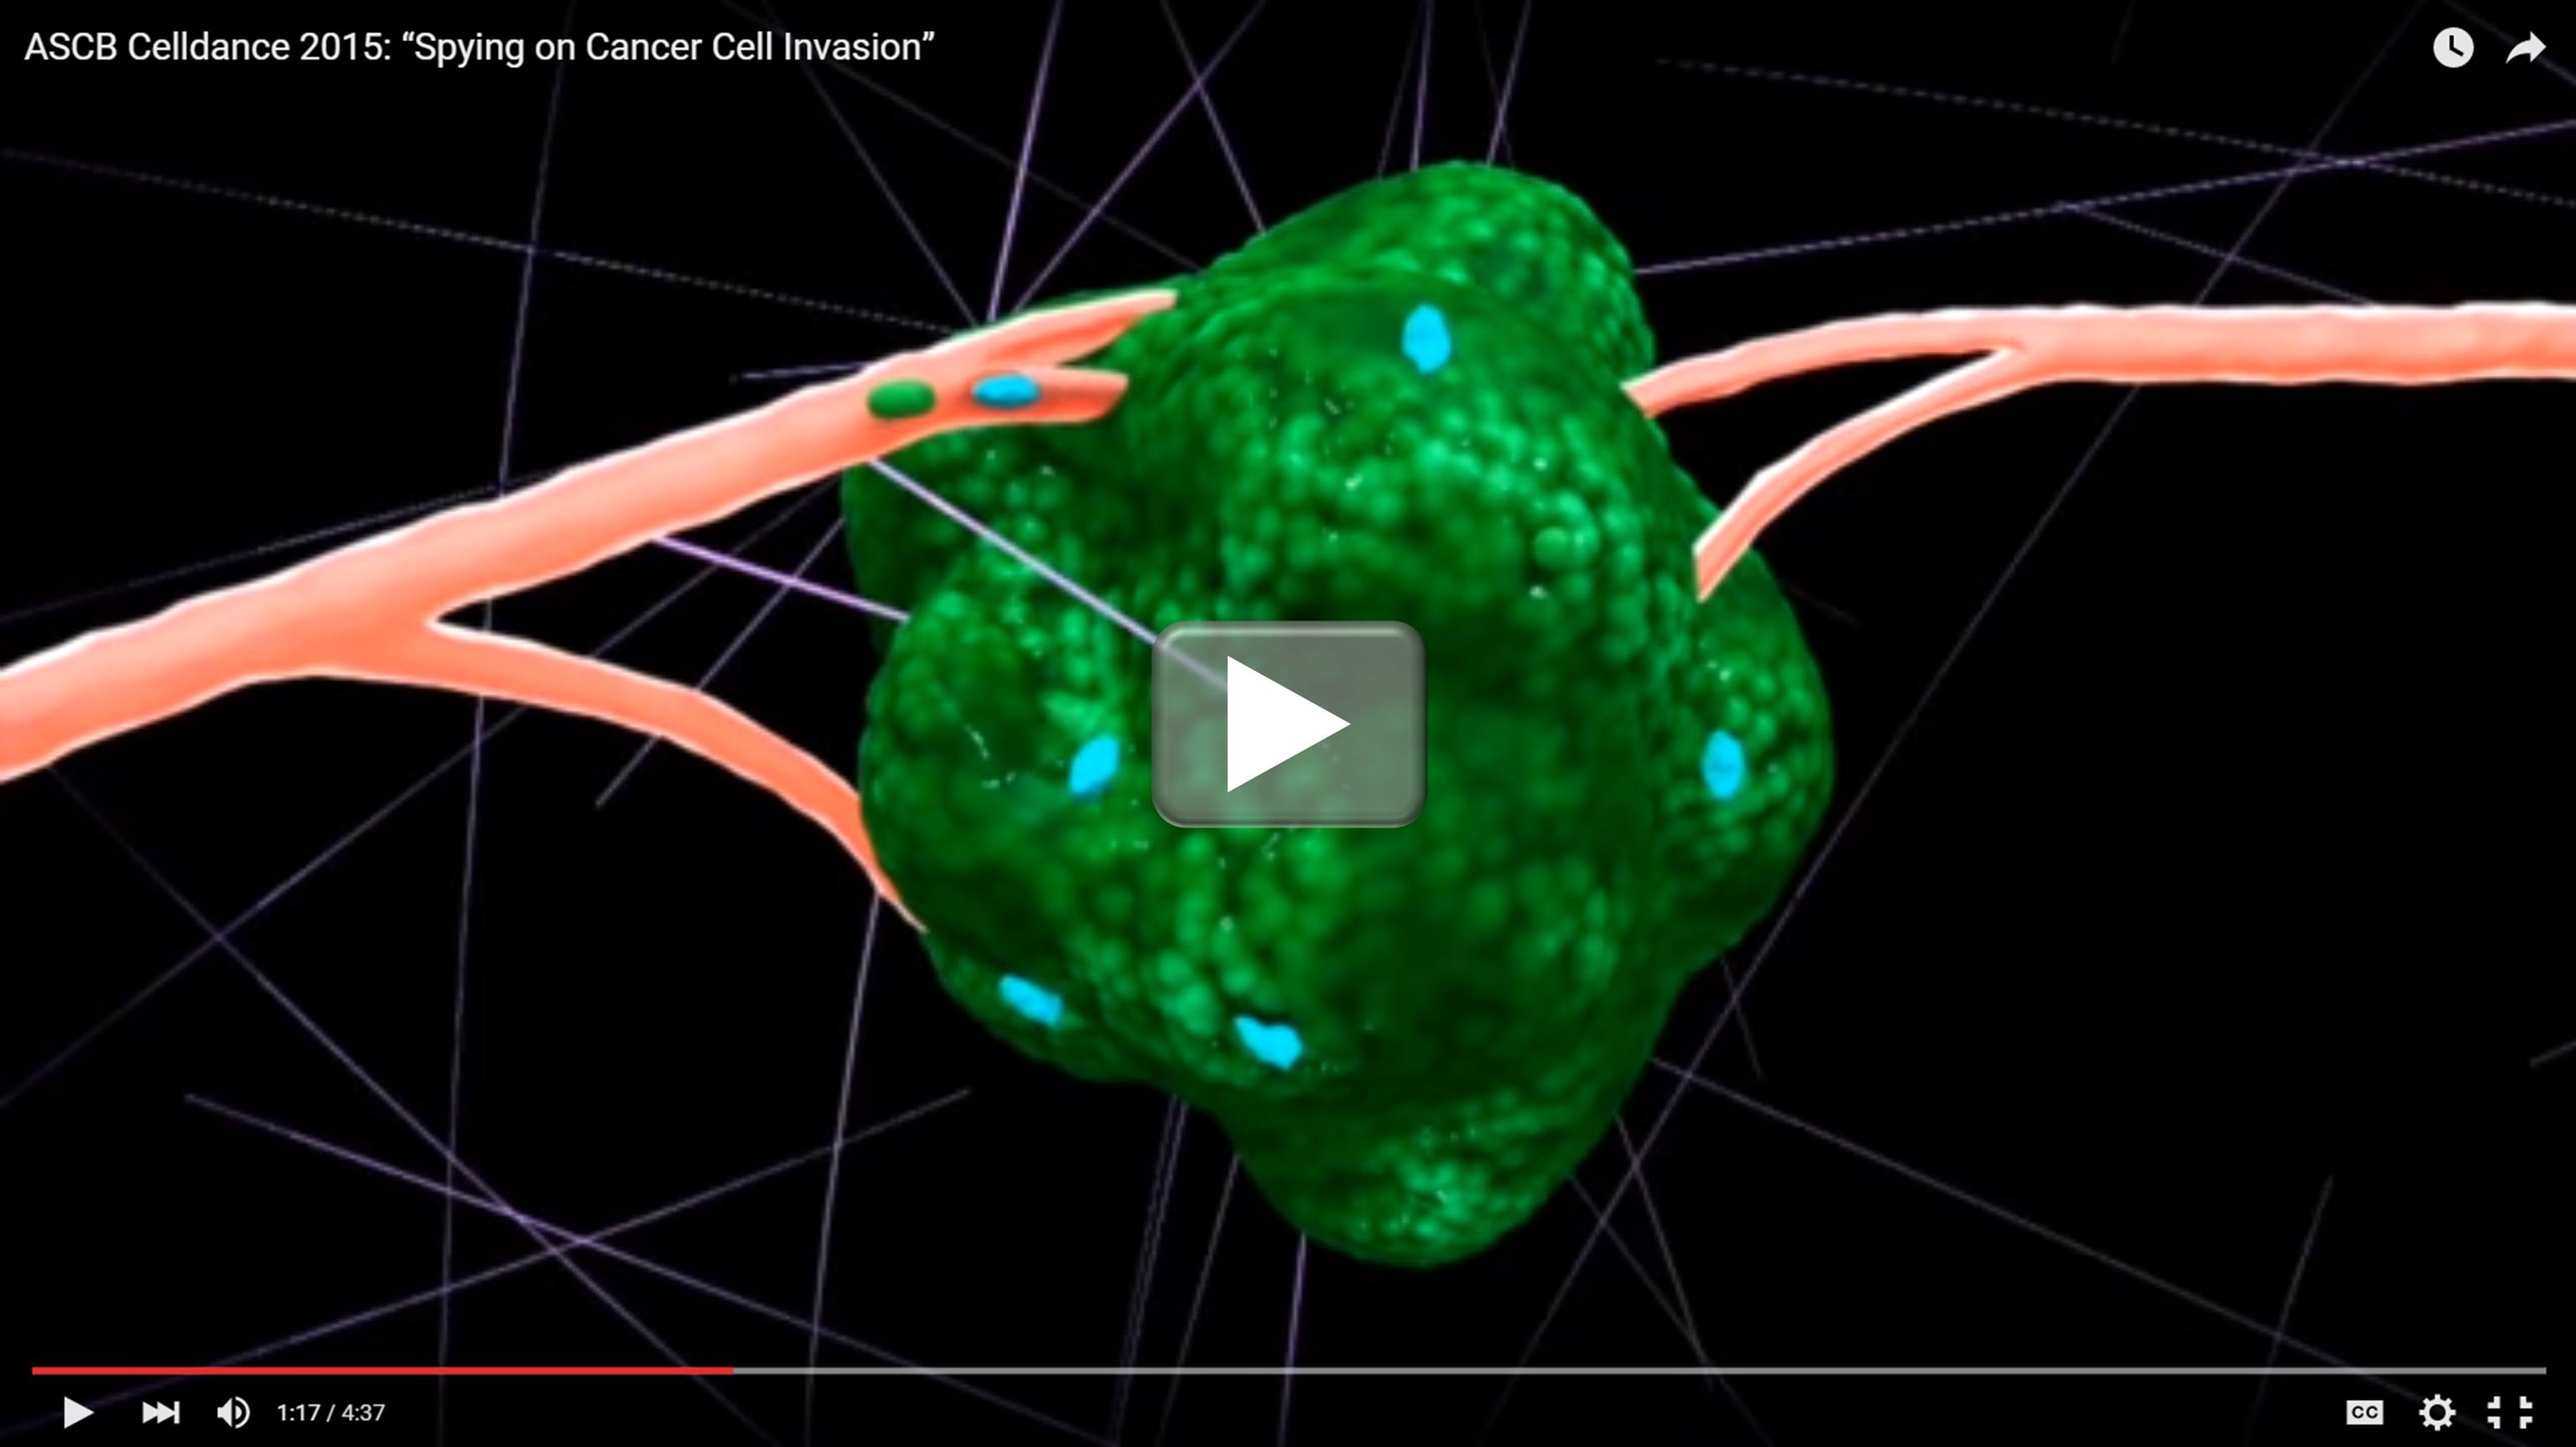 Spying on Cancer Cell Invation